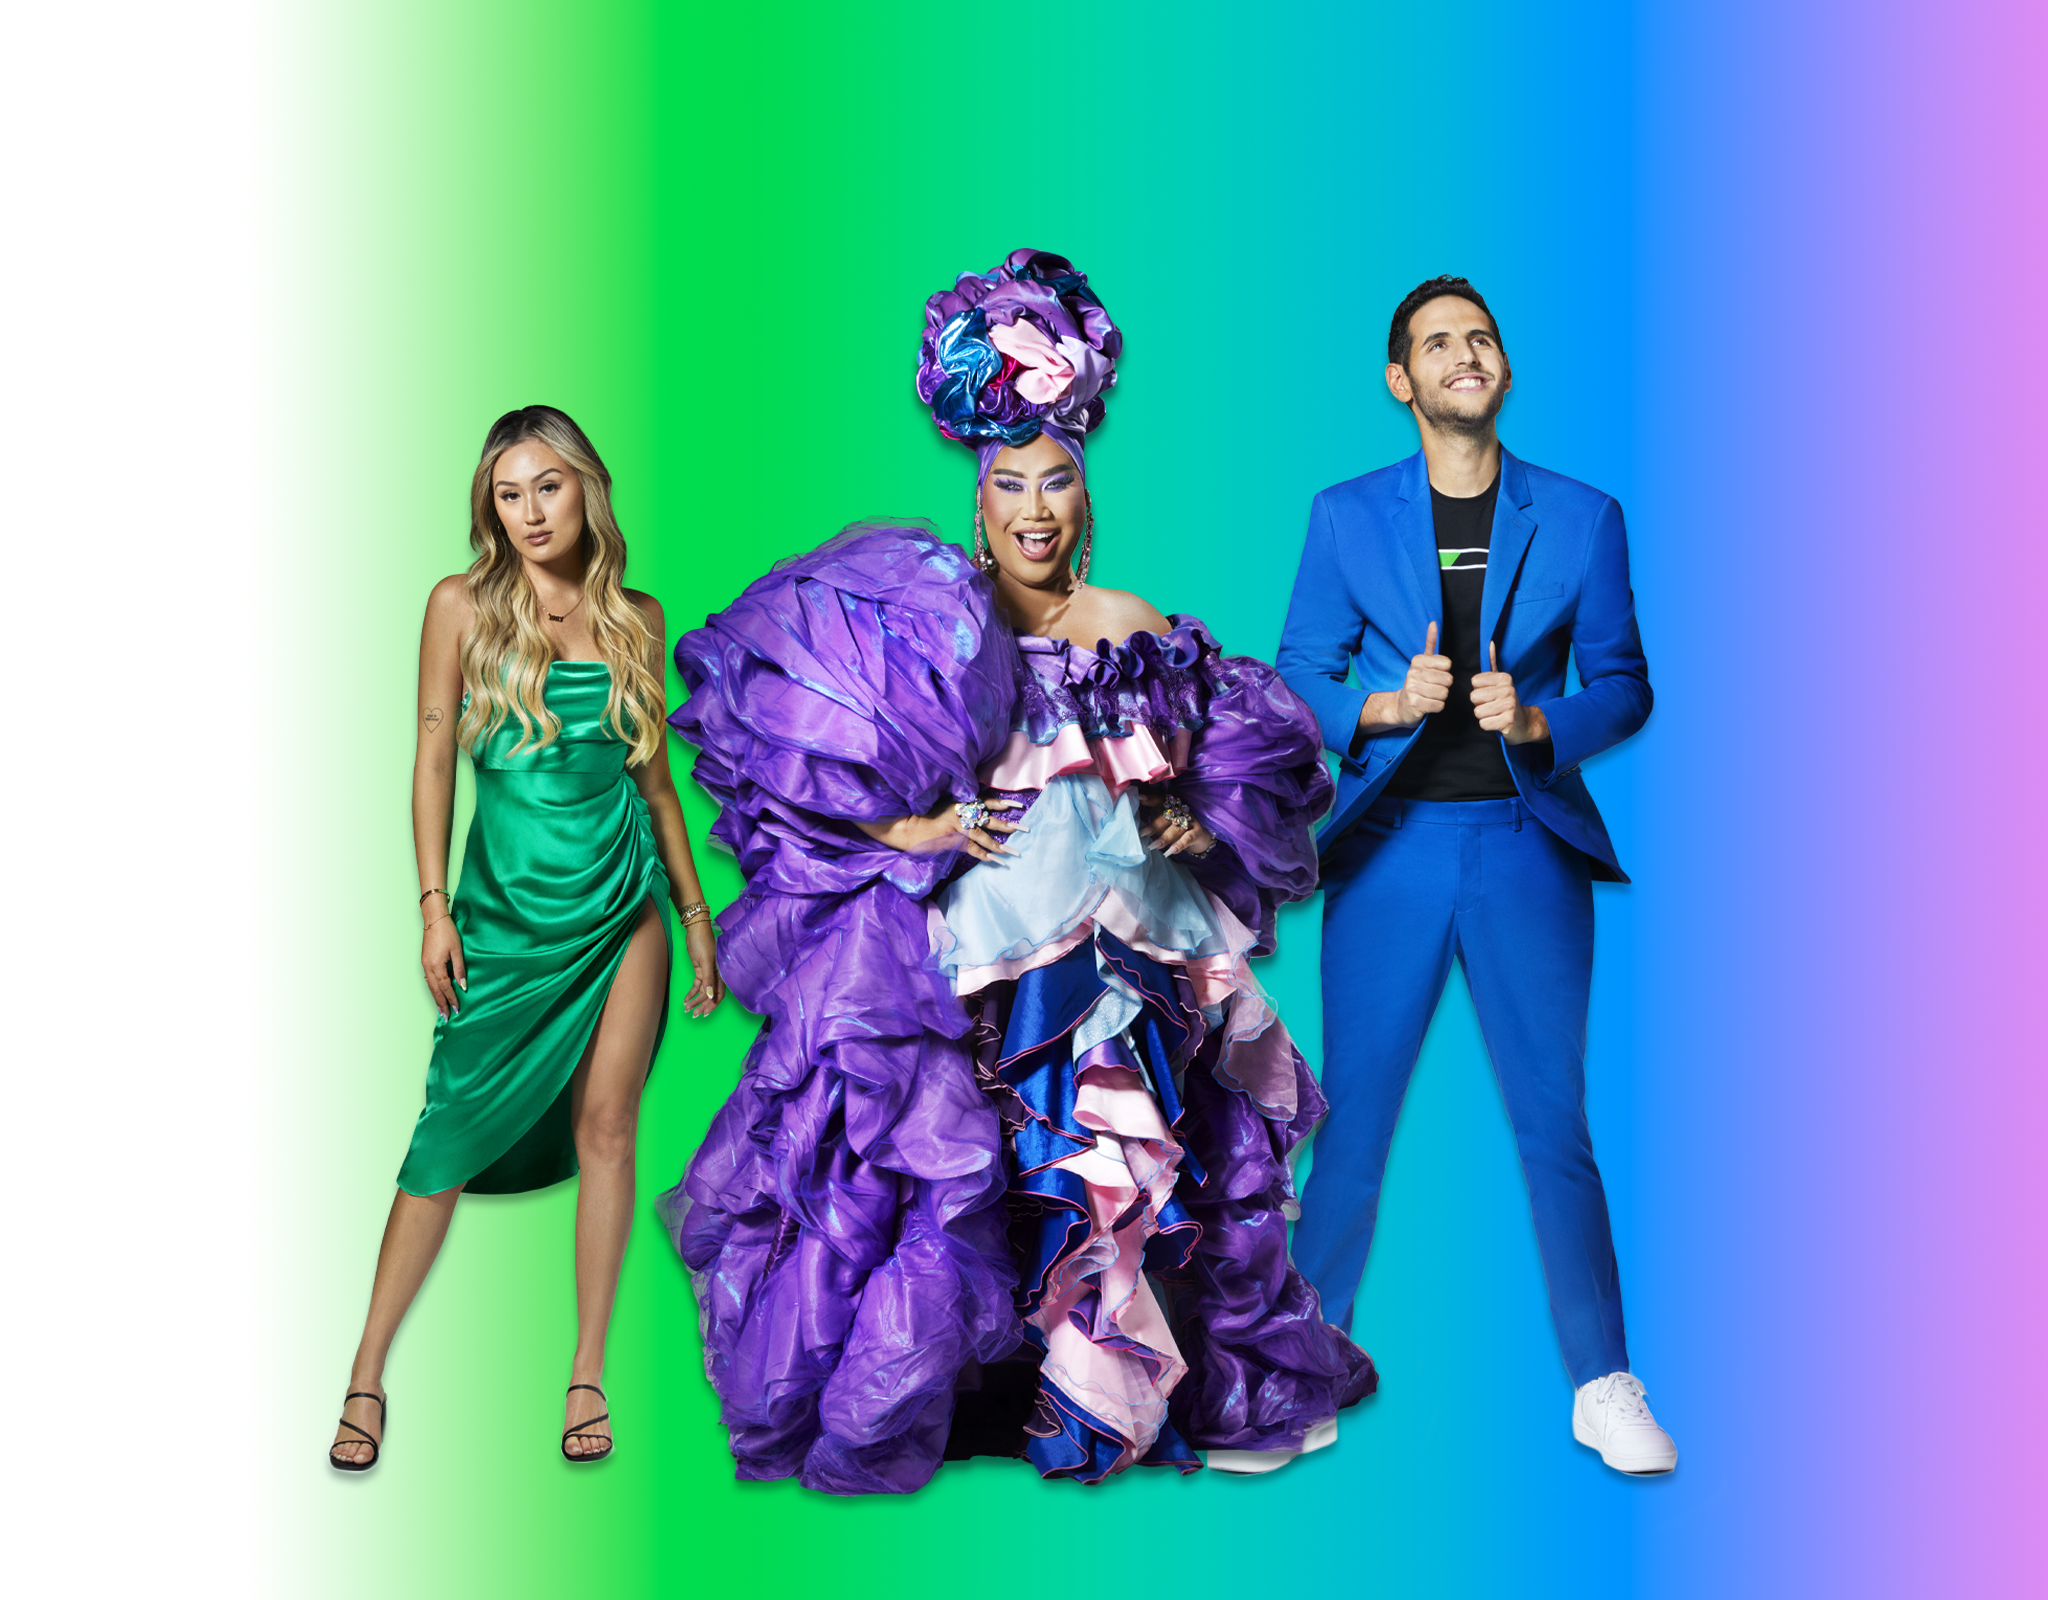 Leading YouTube and video creators LaurDIY, Patrick Starrr, and Nas Daily posed in a lineup in front of a gradient background.